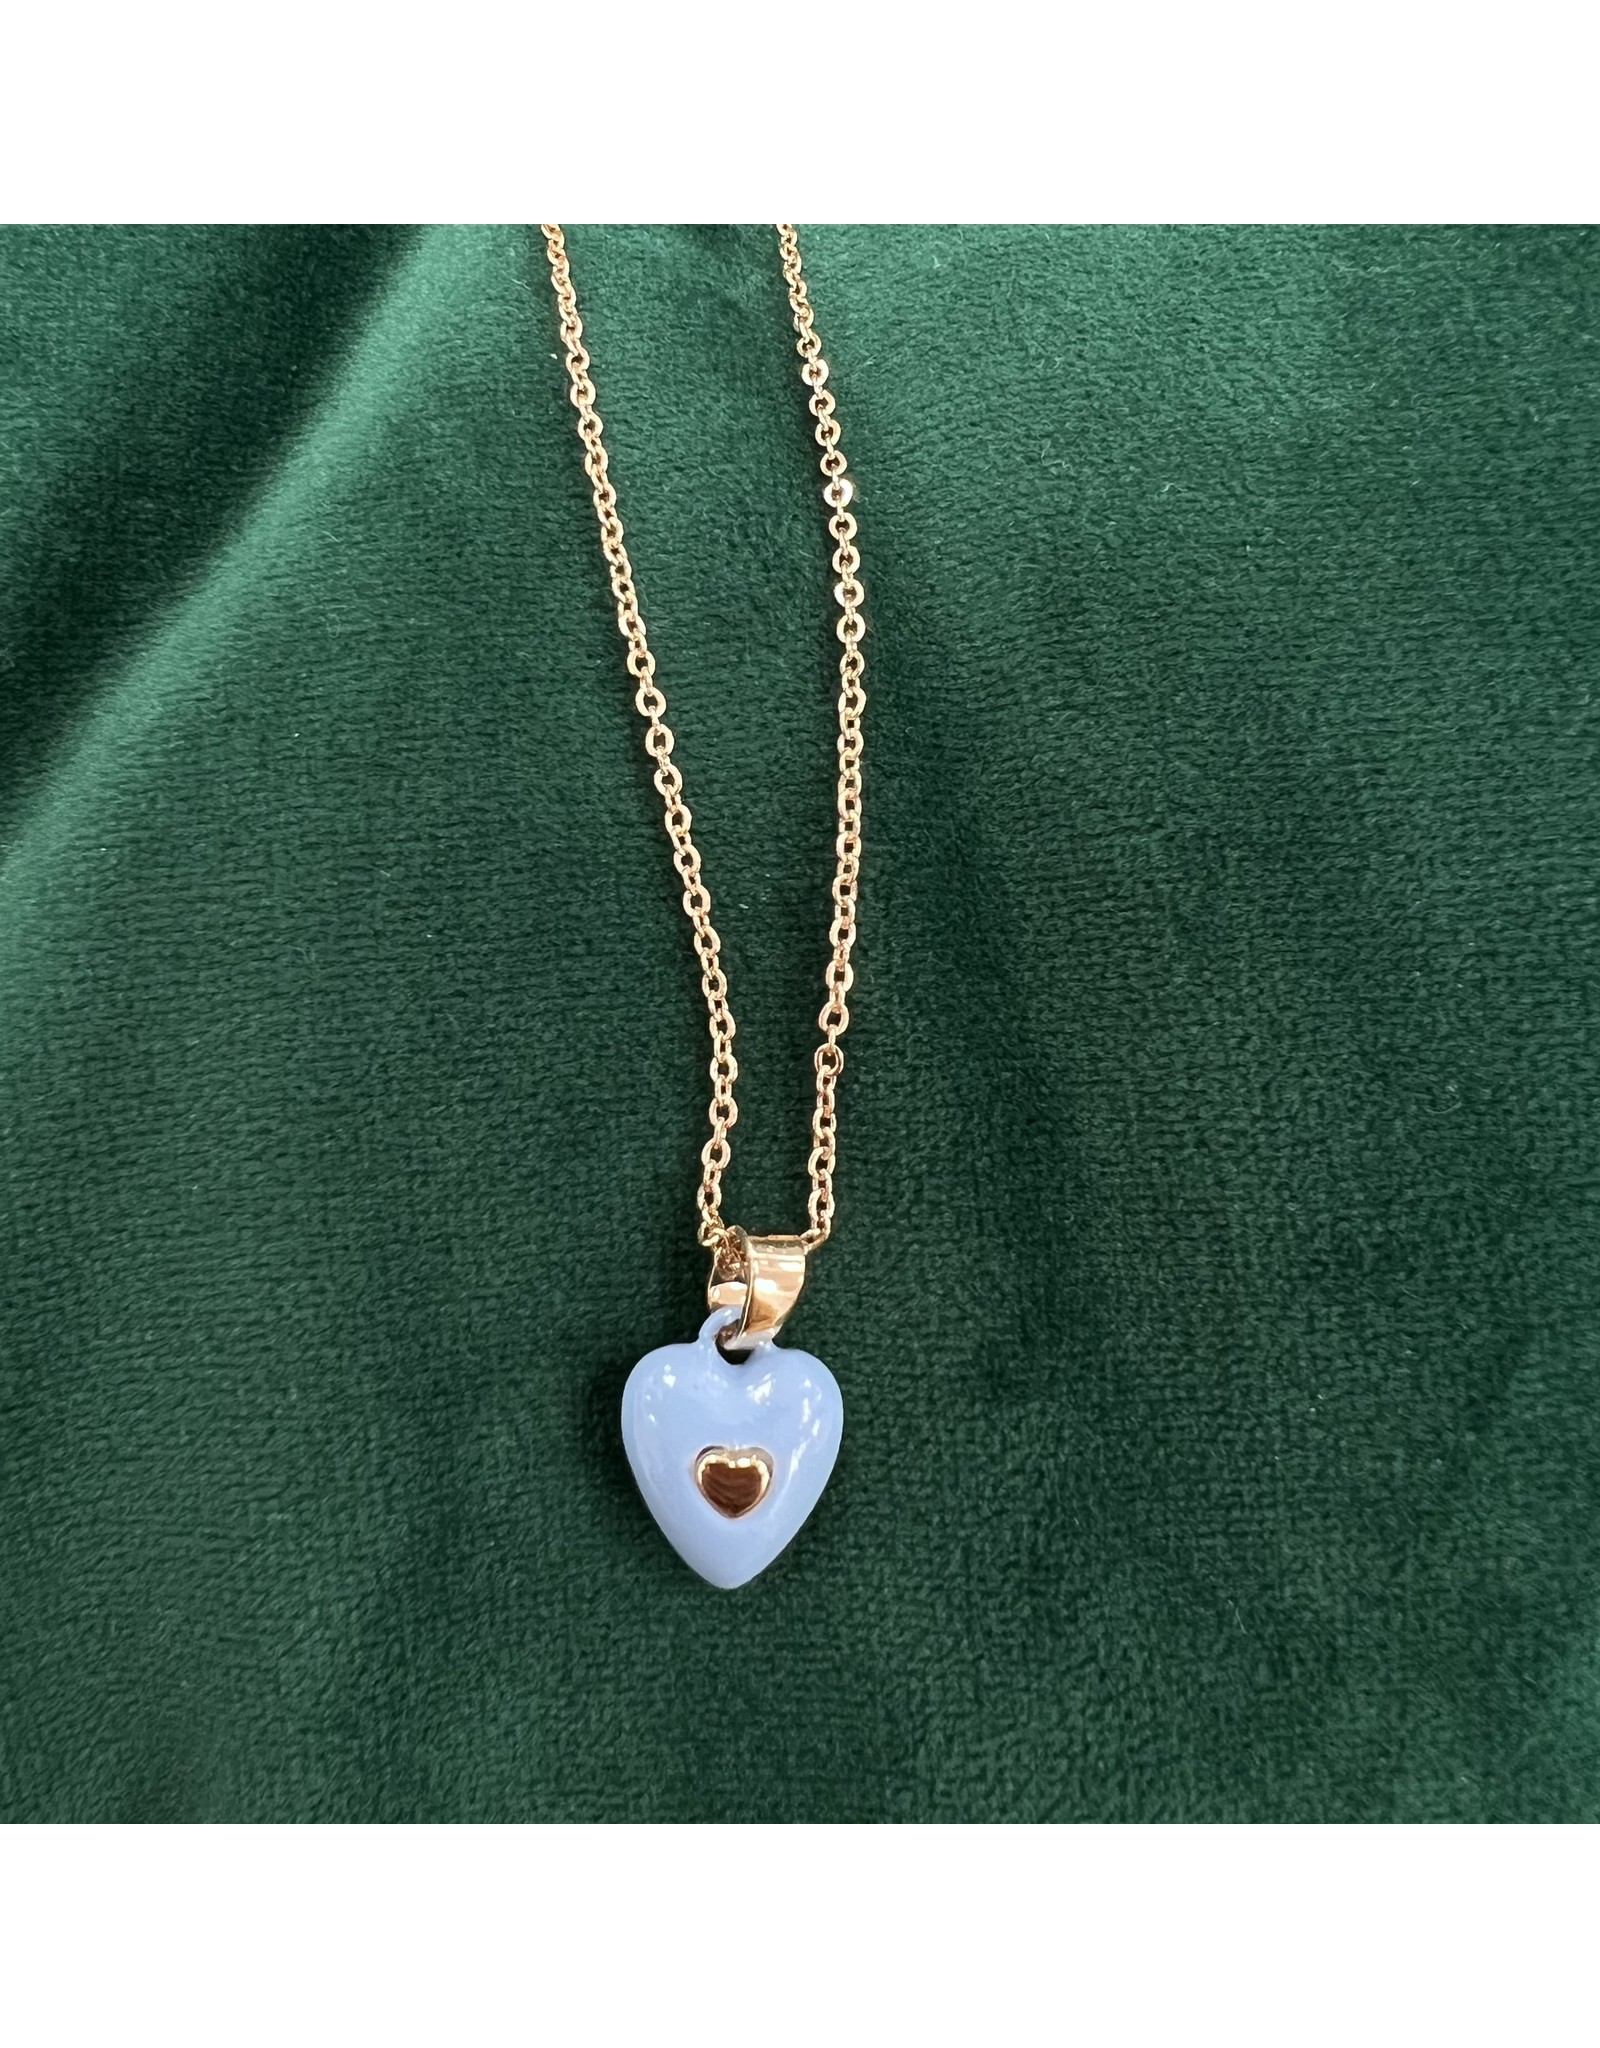 Blue Puffy Heart Necklace